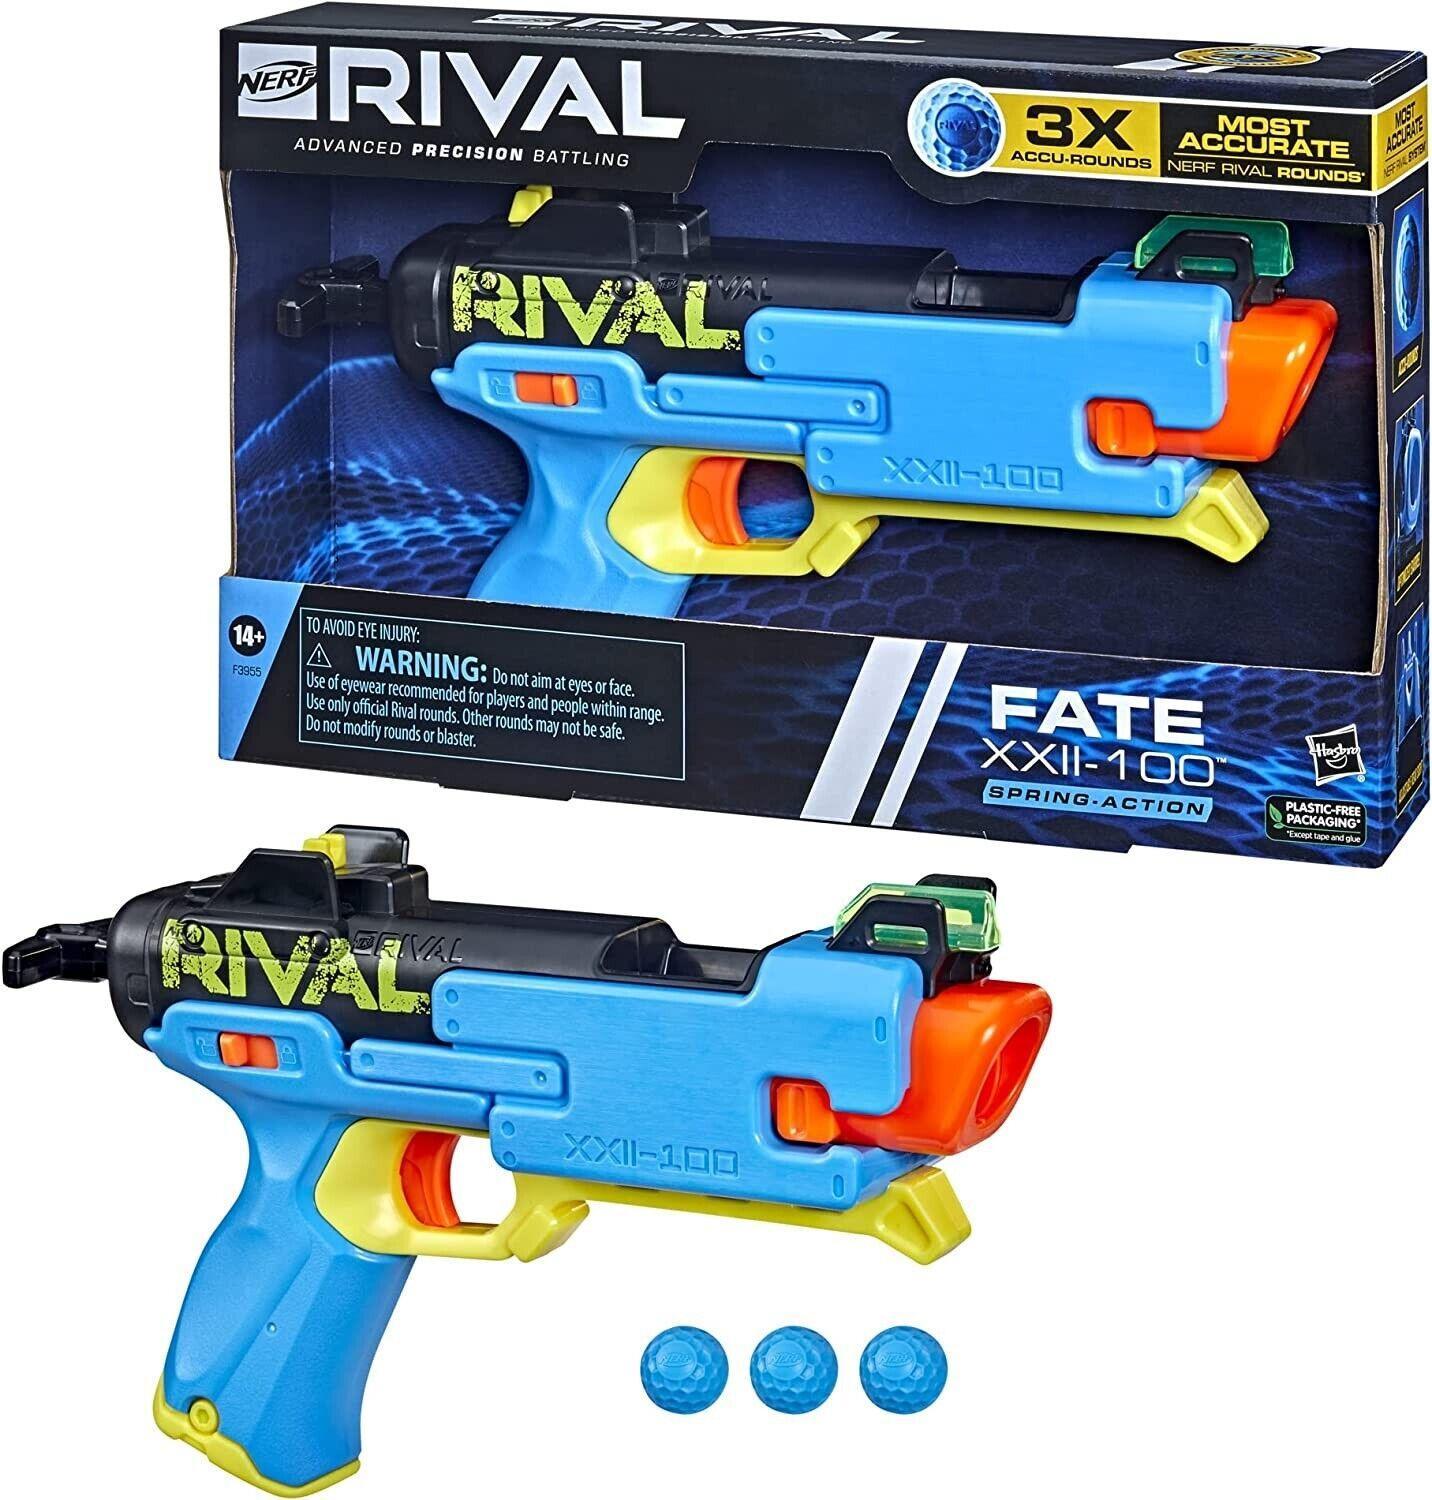 NERF Rival Fate XXII-100 Blaster Most Accurate Rival System Ages 14+ Toy Gun